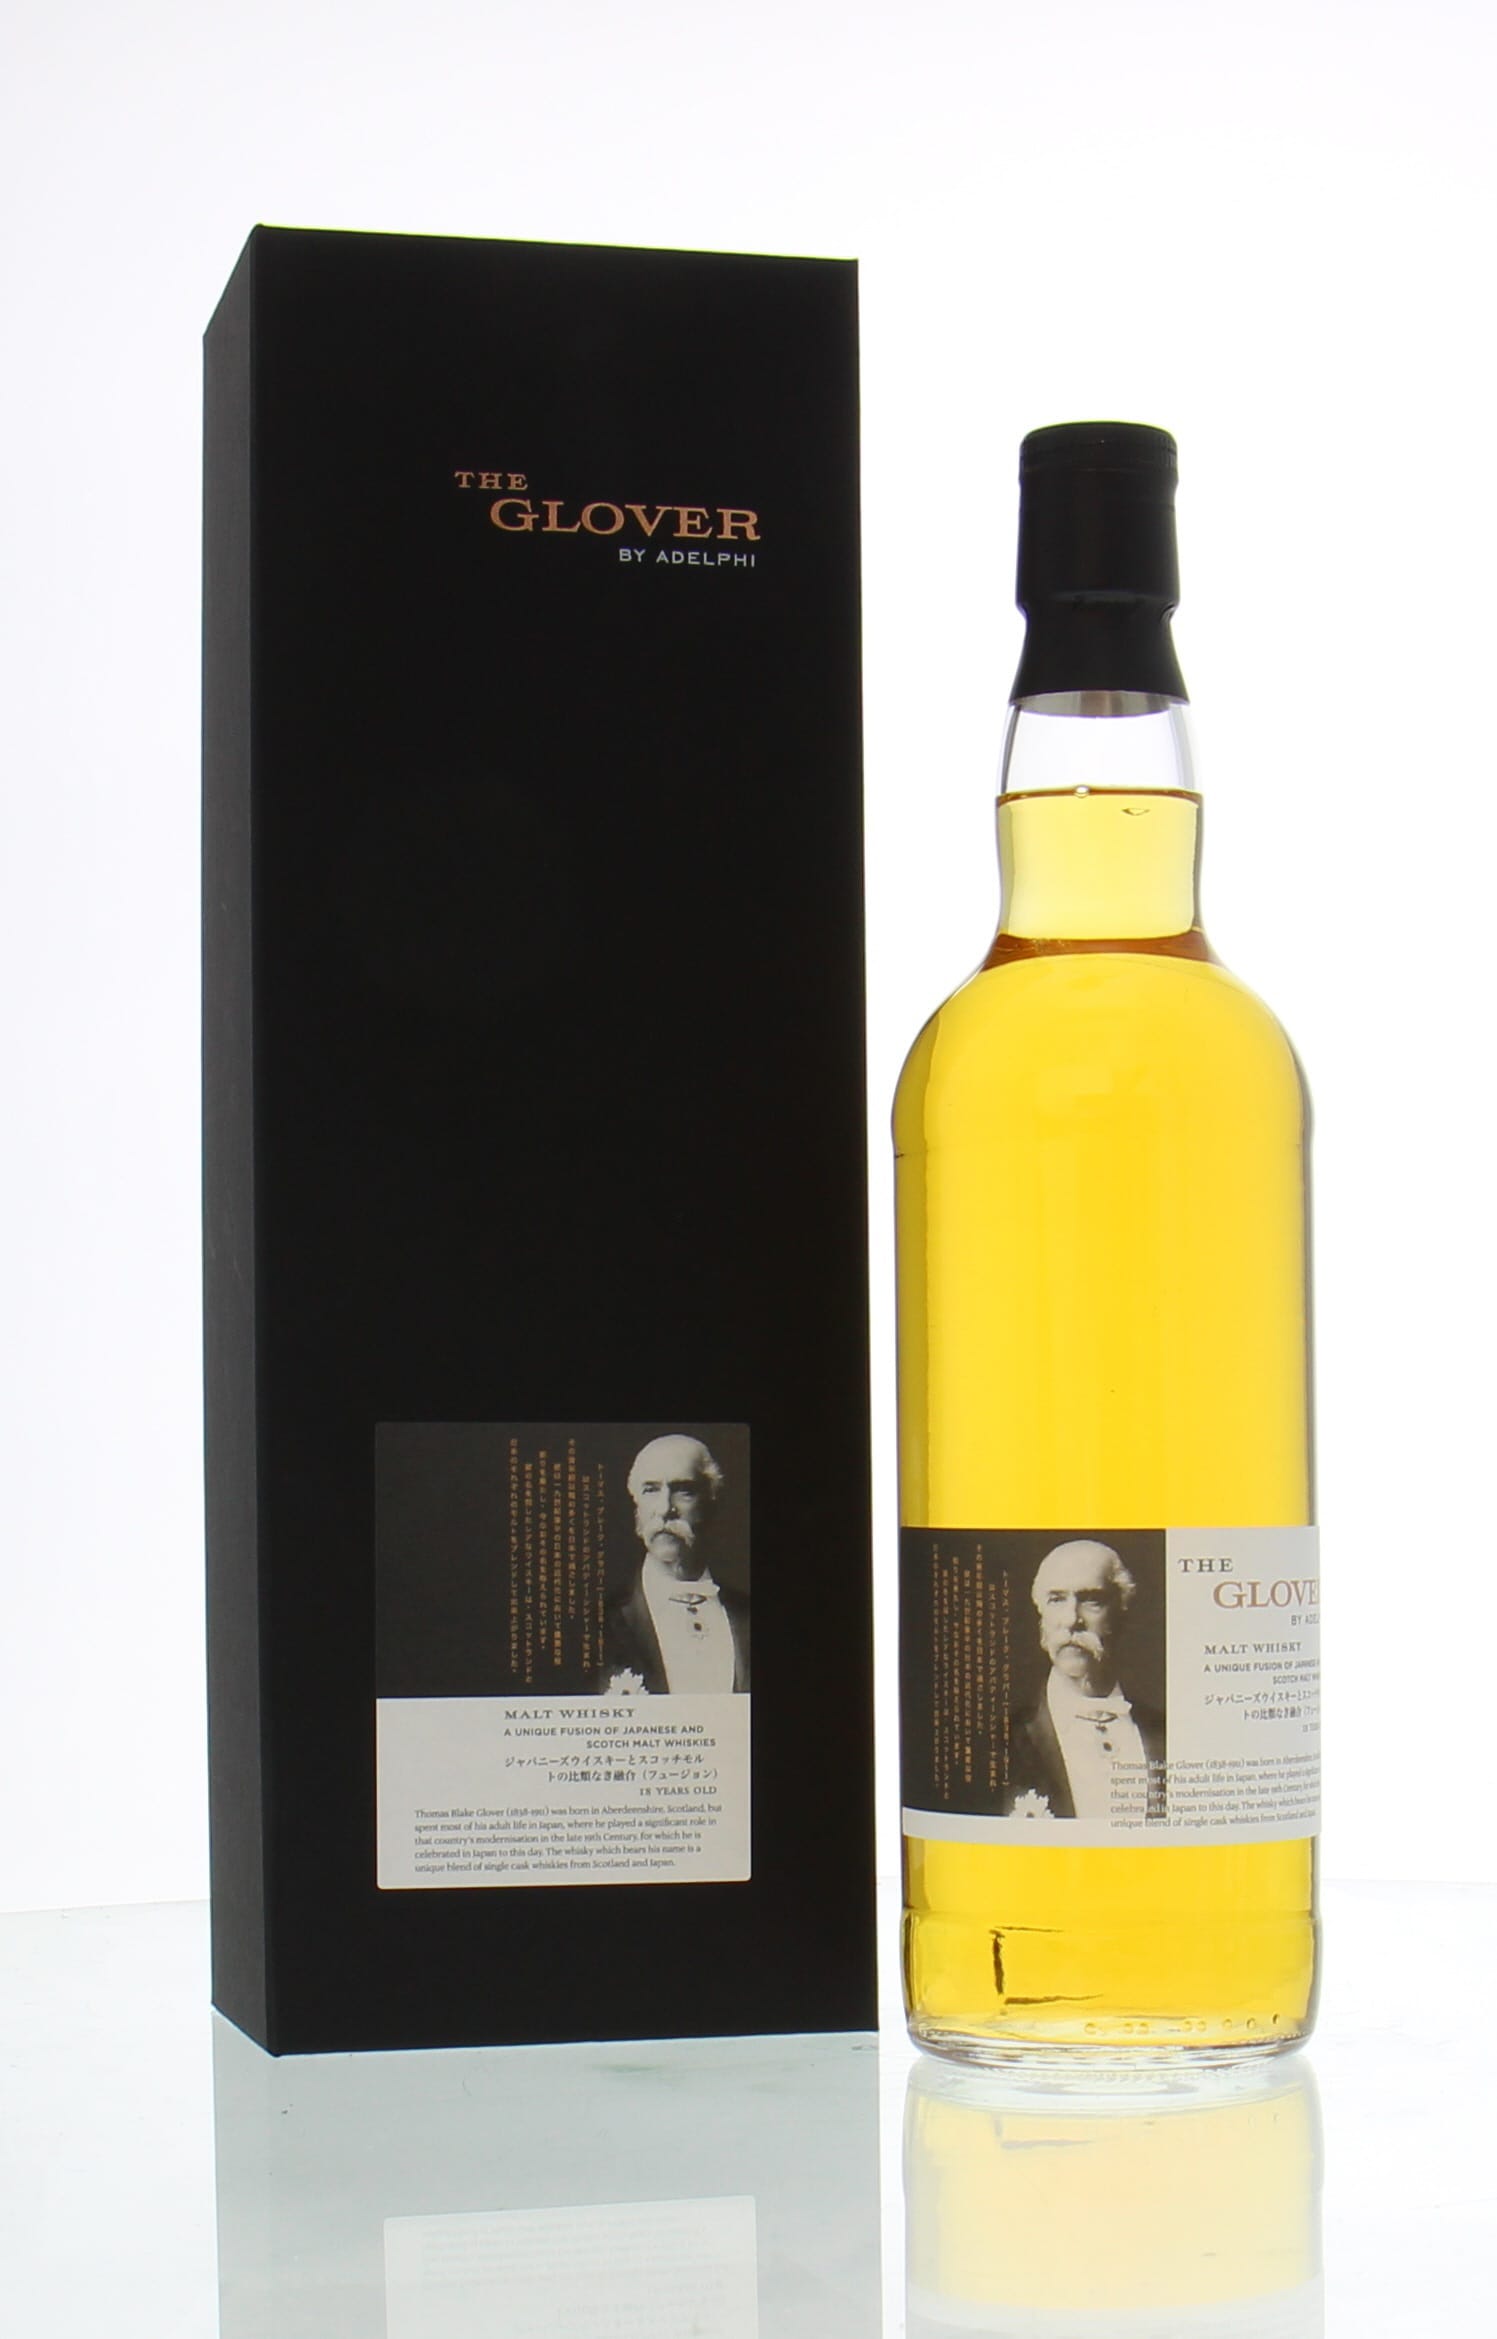 Adelphi - The Glover 18 Years Old 48.6% NV